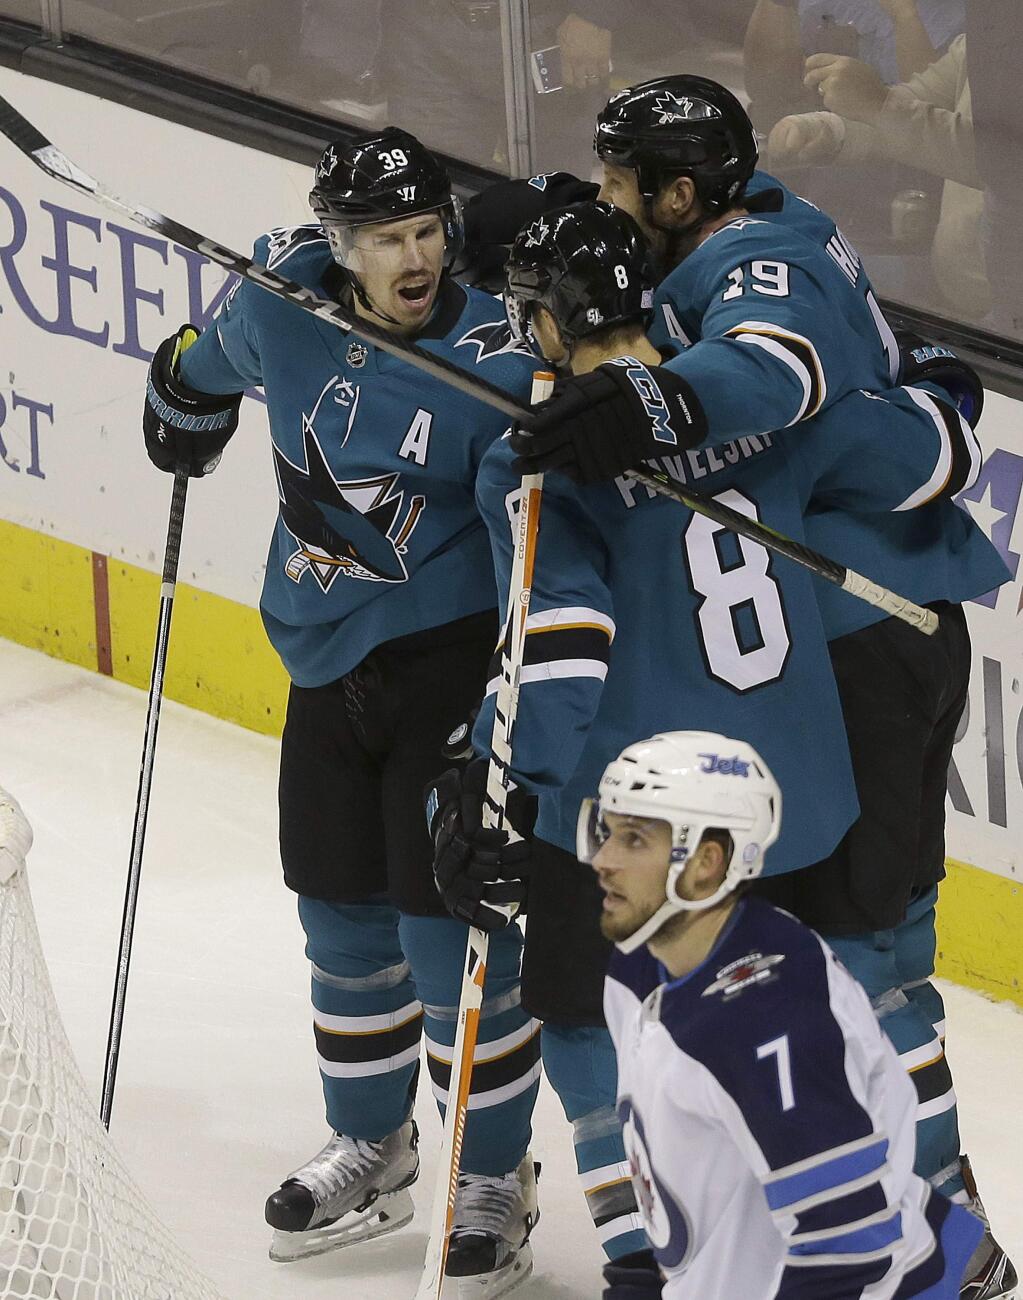 San Jose Sharks center Logan Couture, left, is congratulated by center Joe Pavelski (8) and center Joe Thornton (19) after scoring a goal against the Winnipeg Jets during the first period in San Jose, Saturday, Nov. 25, 2017. (AP Photo/Jeff Chiu)